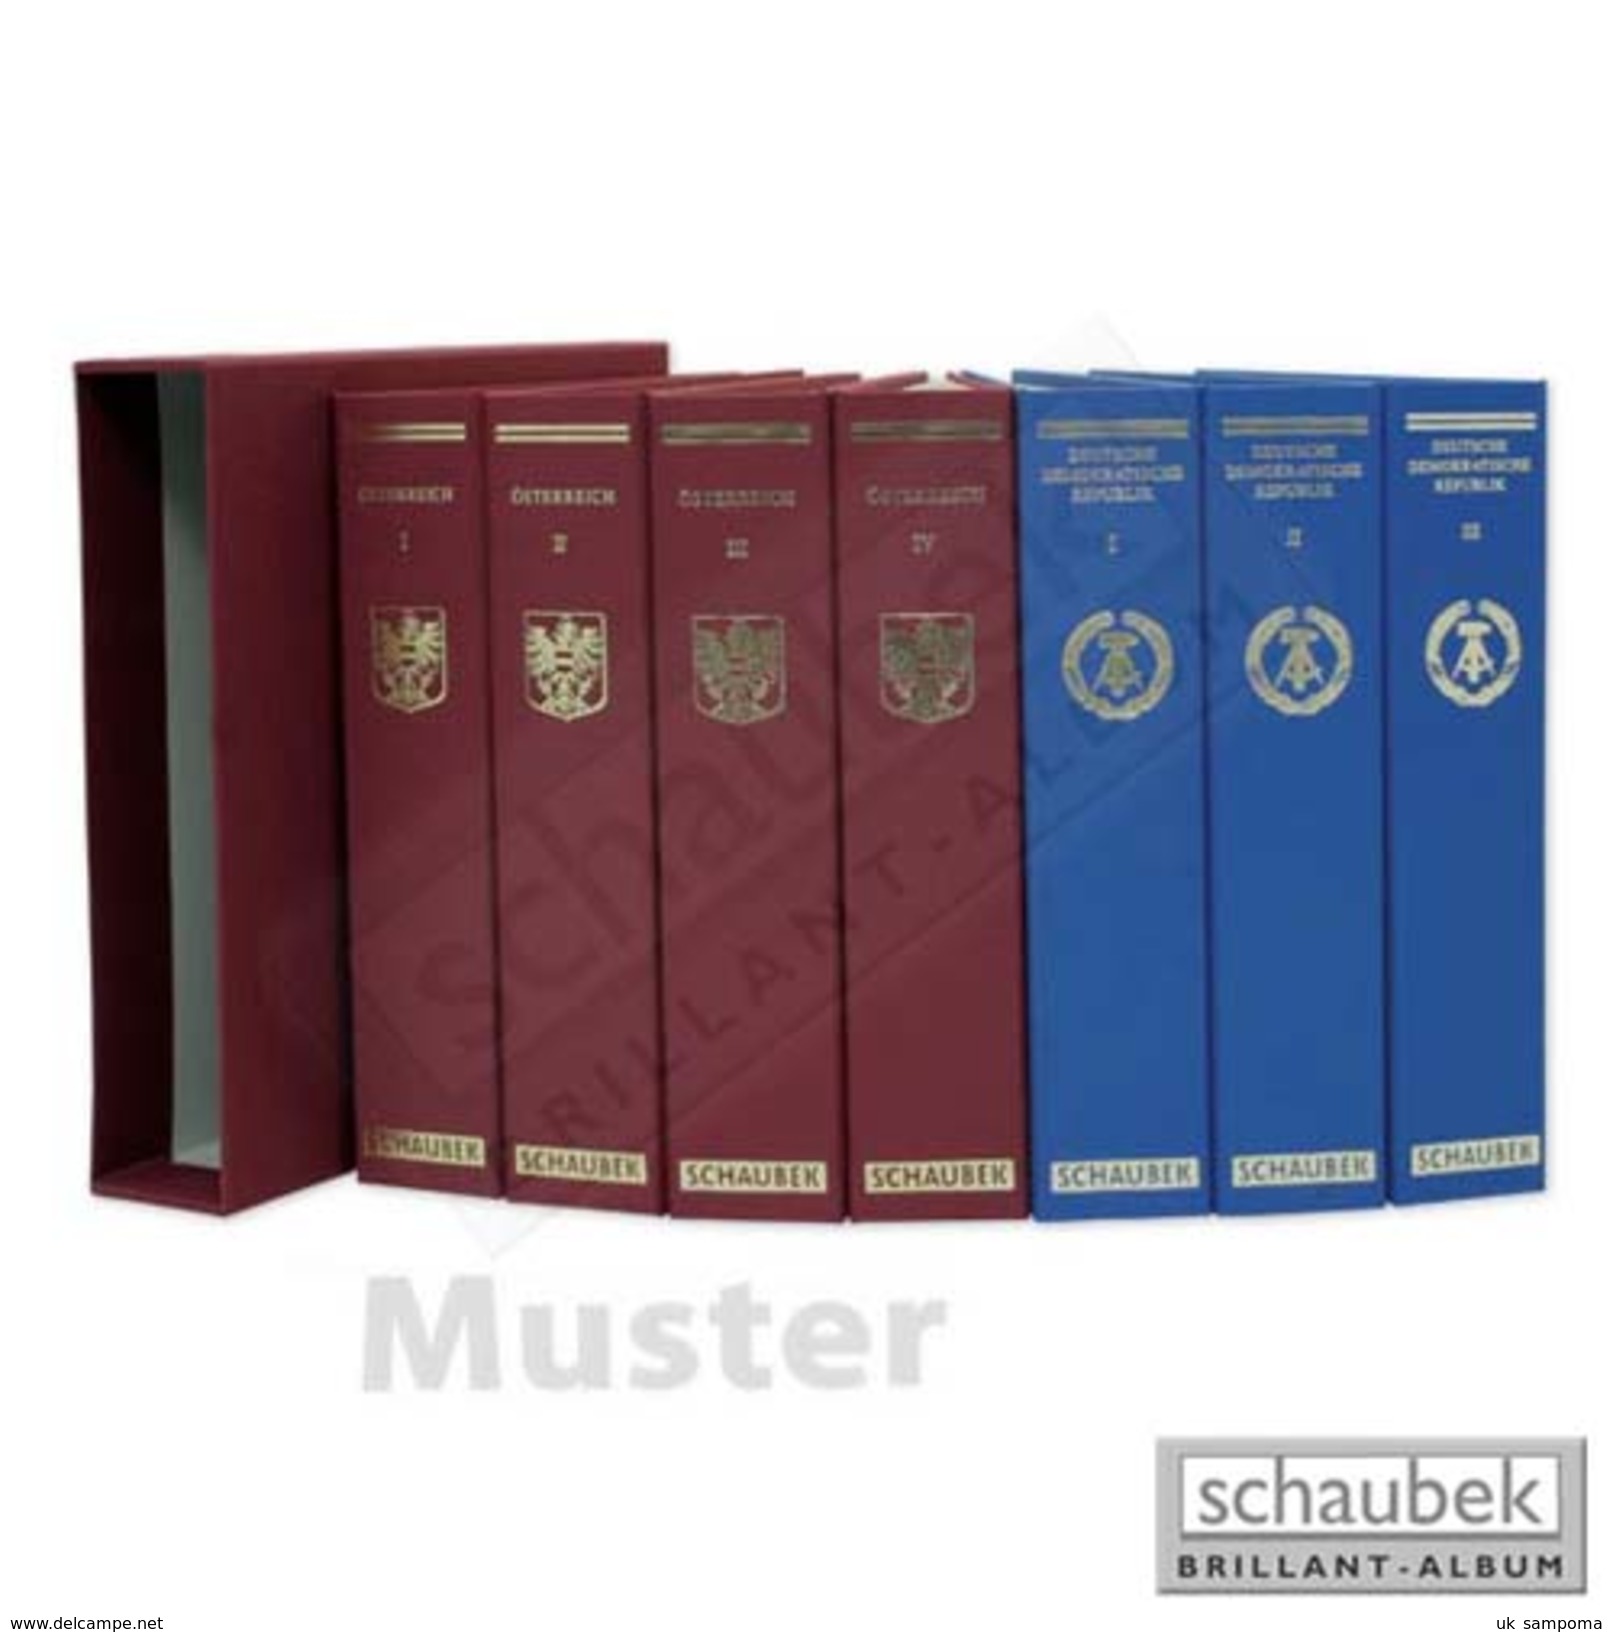 Schaubek A-822/07B Album Hungary 1990-1999 Brillant, In A Blue Screw Post Binder, Vol. VII, Without Slipcase - Binders With Pages